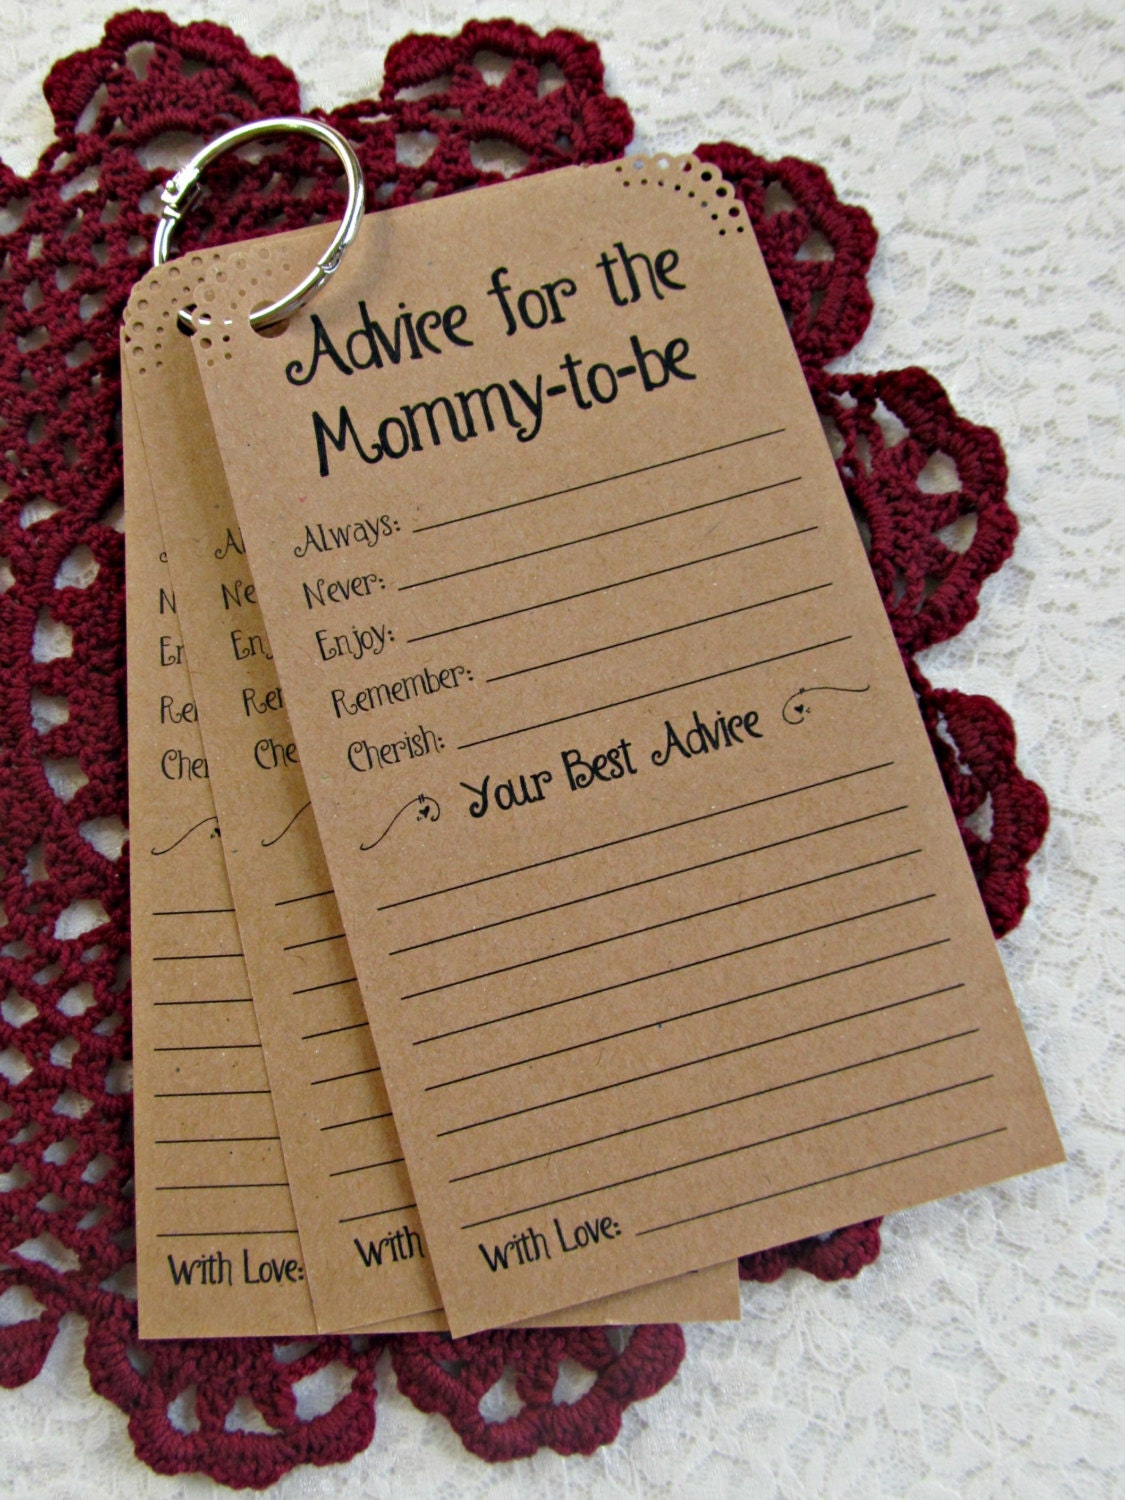 set-of-12-baby-shower-advice-tags-cards-for-the-mommy-to-be